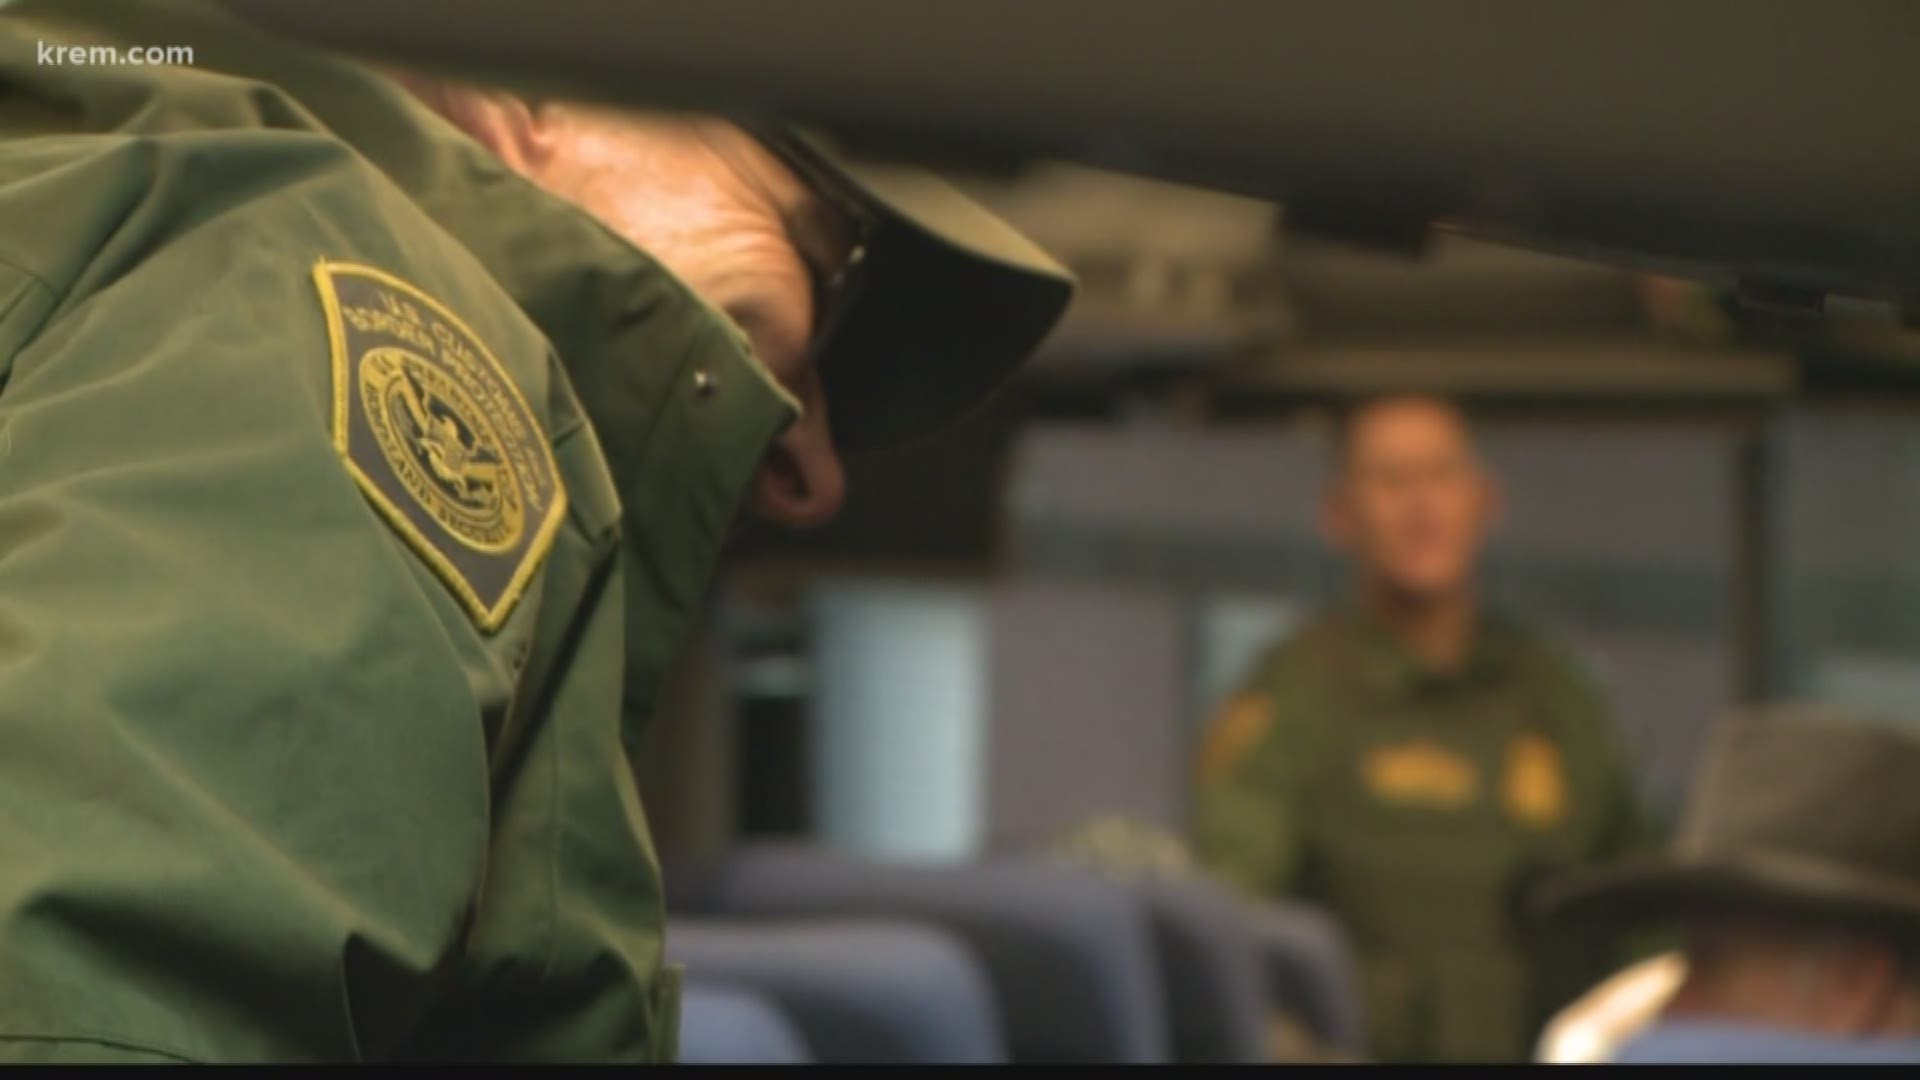 Border Patrol agents arrested 71 people at the Spokane Intermodal Station from Oct. 1, 2018 to Sept. 30, 2019.